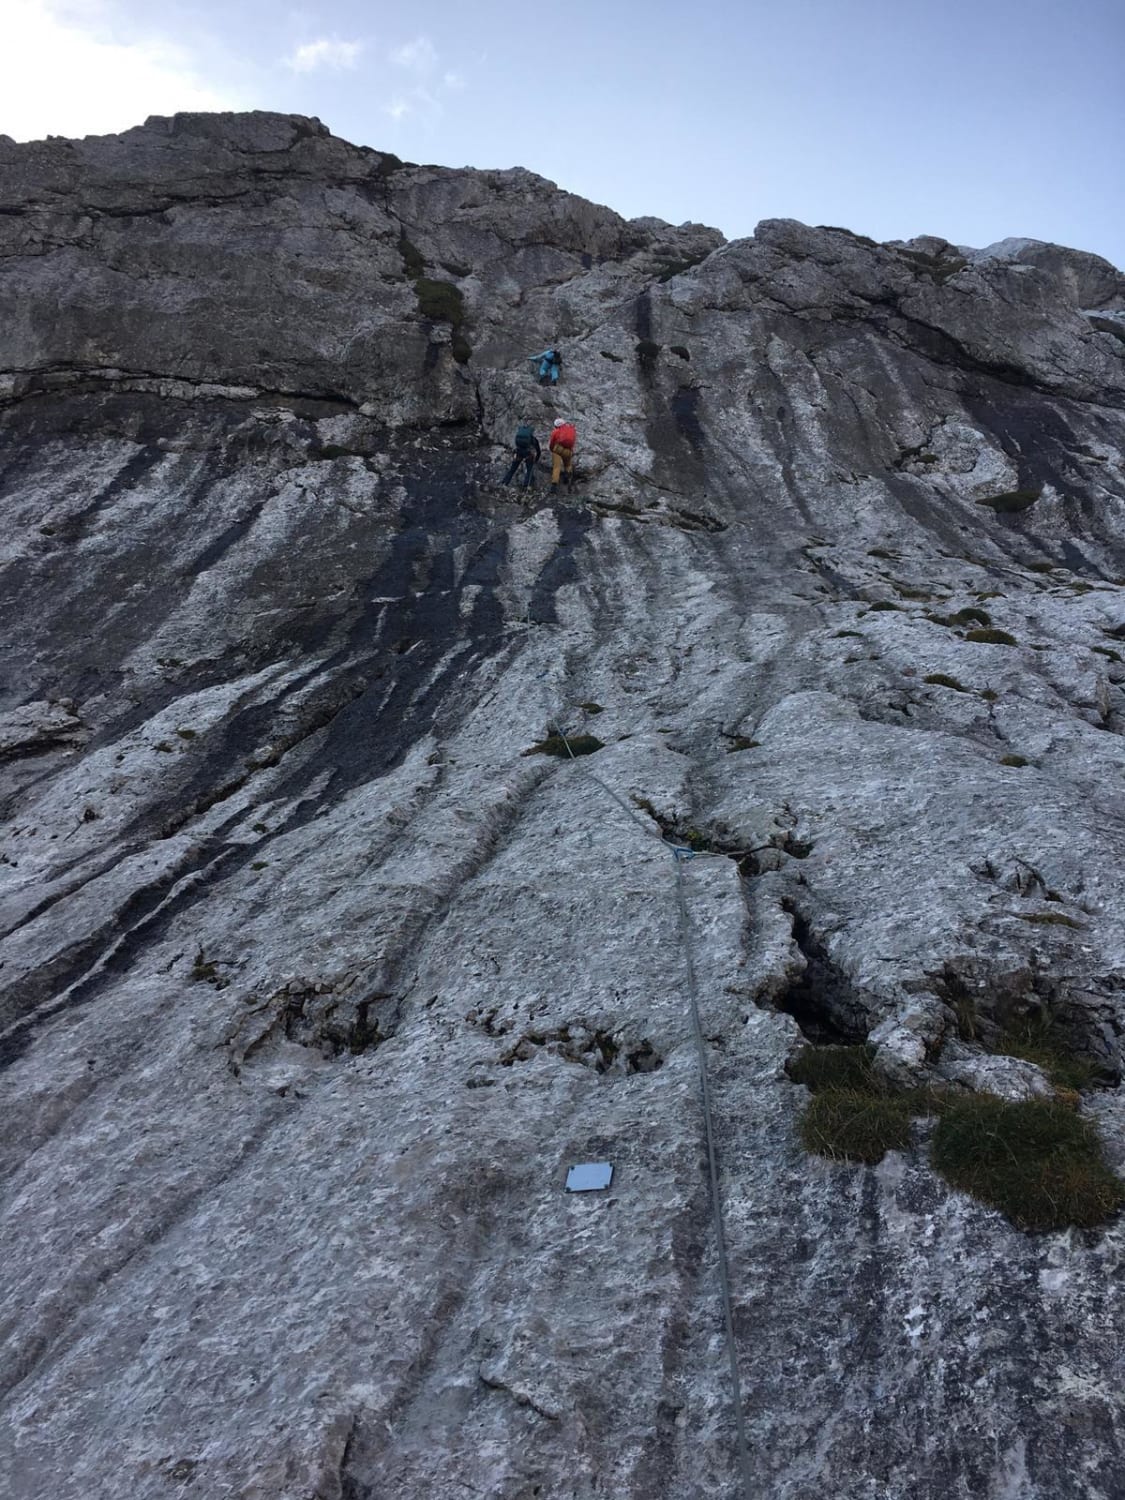 Recent trip to the alps, first time doing an alpine multipitch